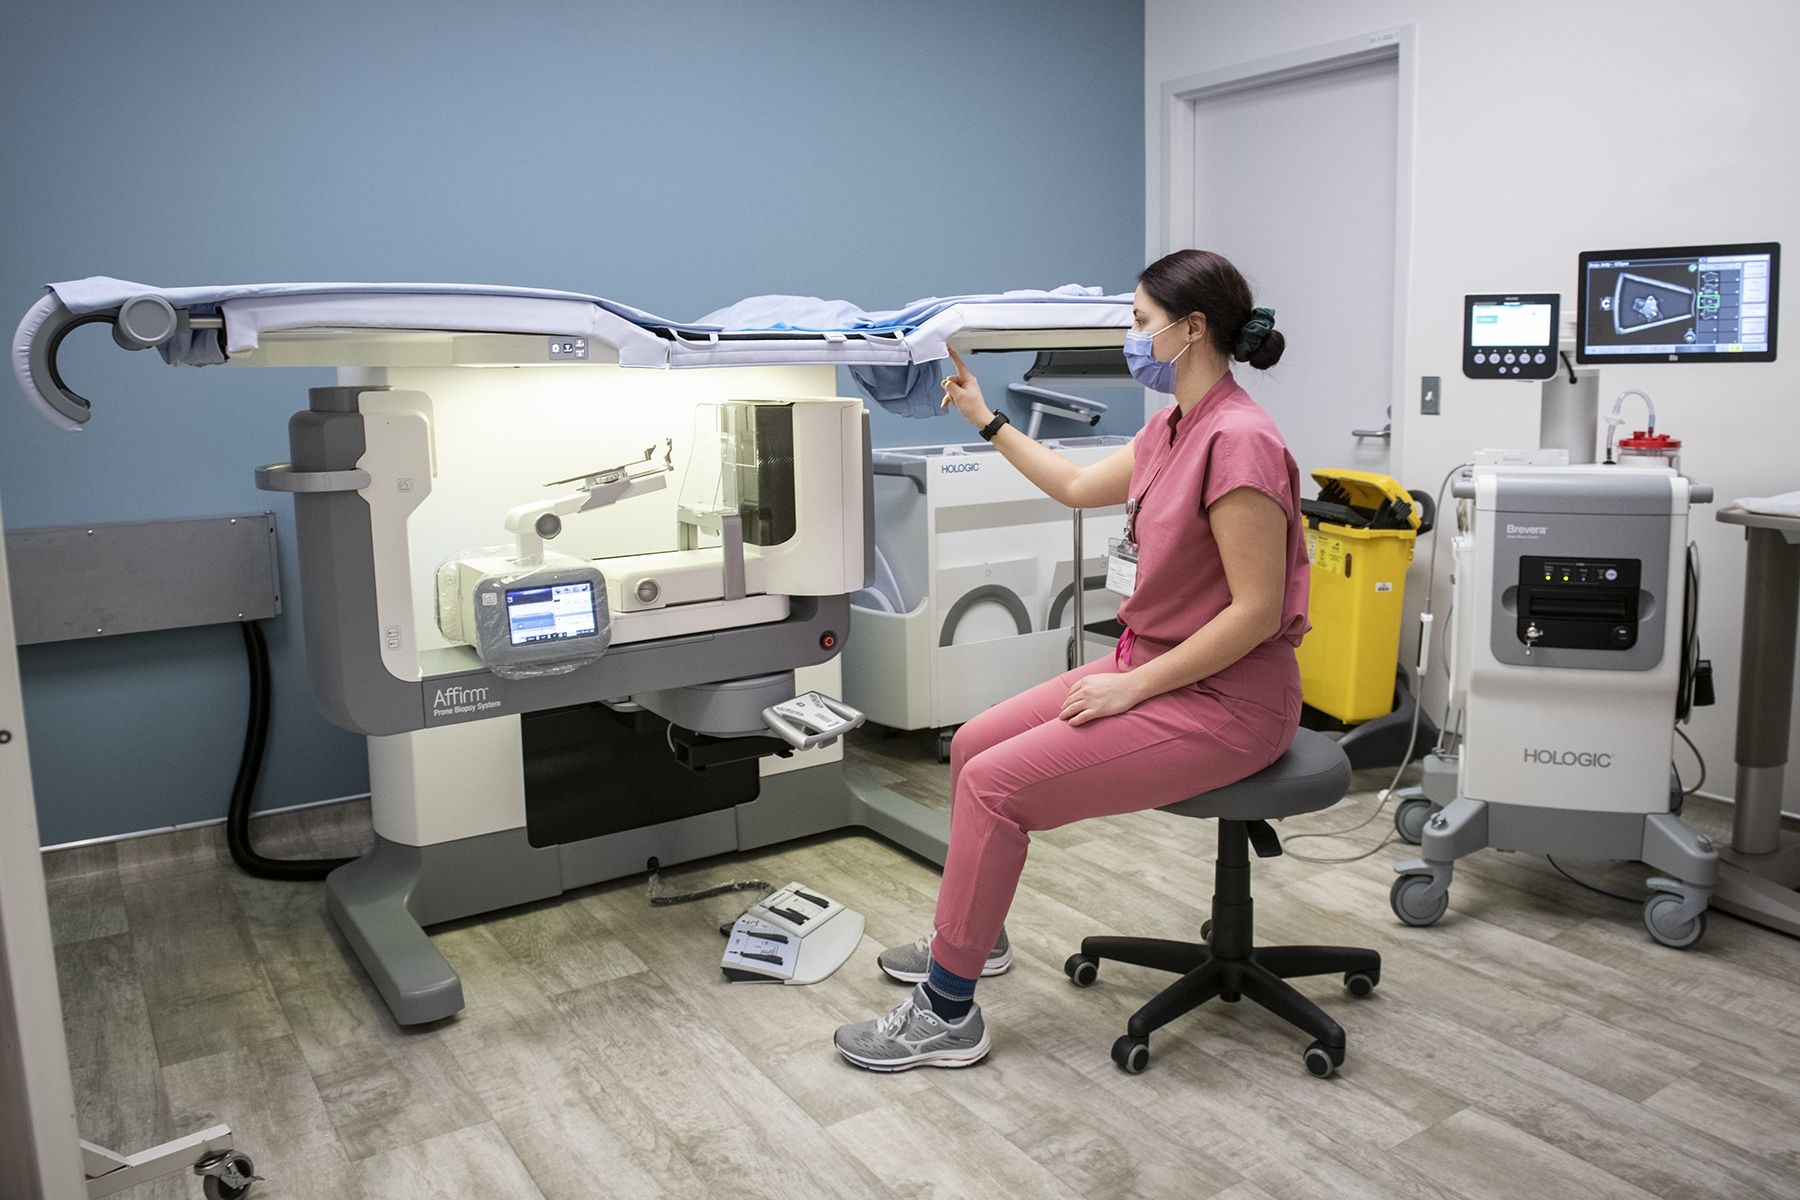 Amanda MacInnis demonstrates the new prone breast biopsy table that helps provide better accuracy, shorter procedures and improved patient comfort for those receiving a breast mammography and biopsy.